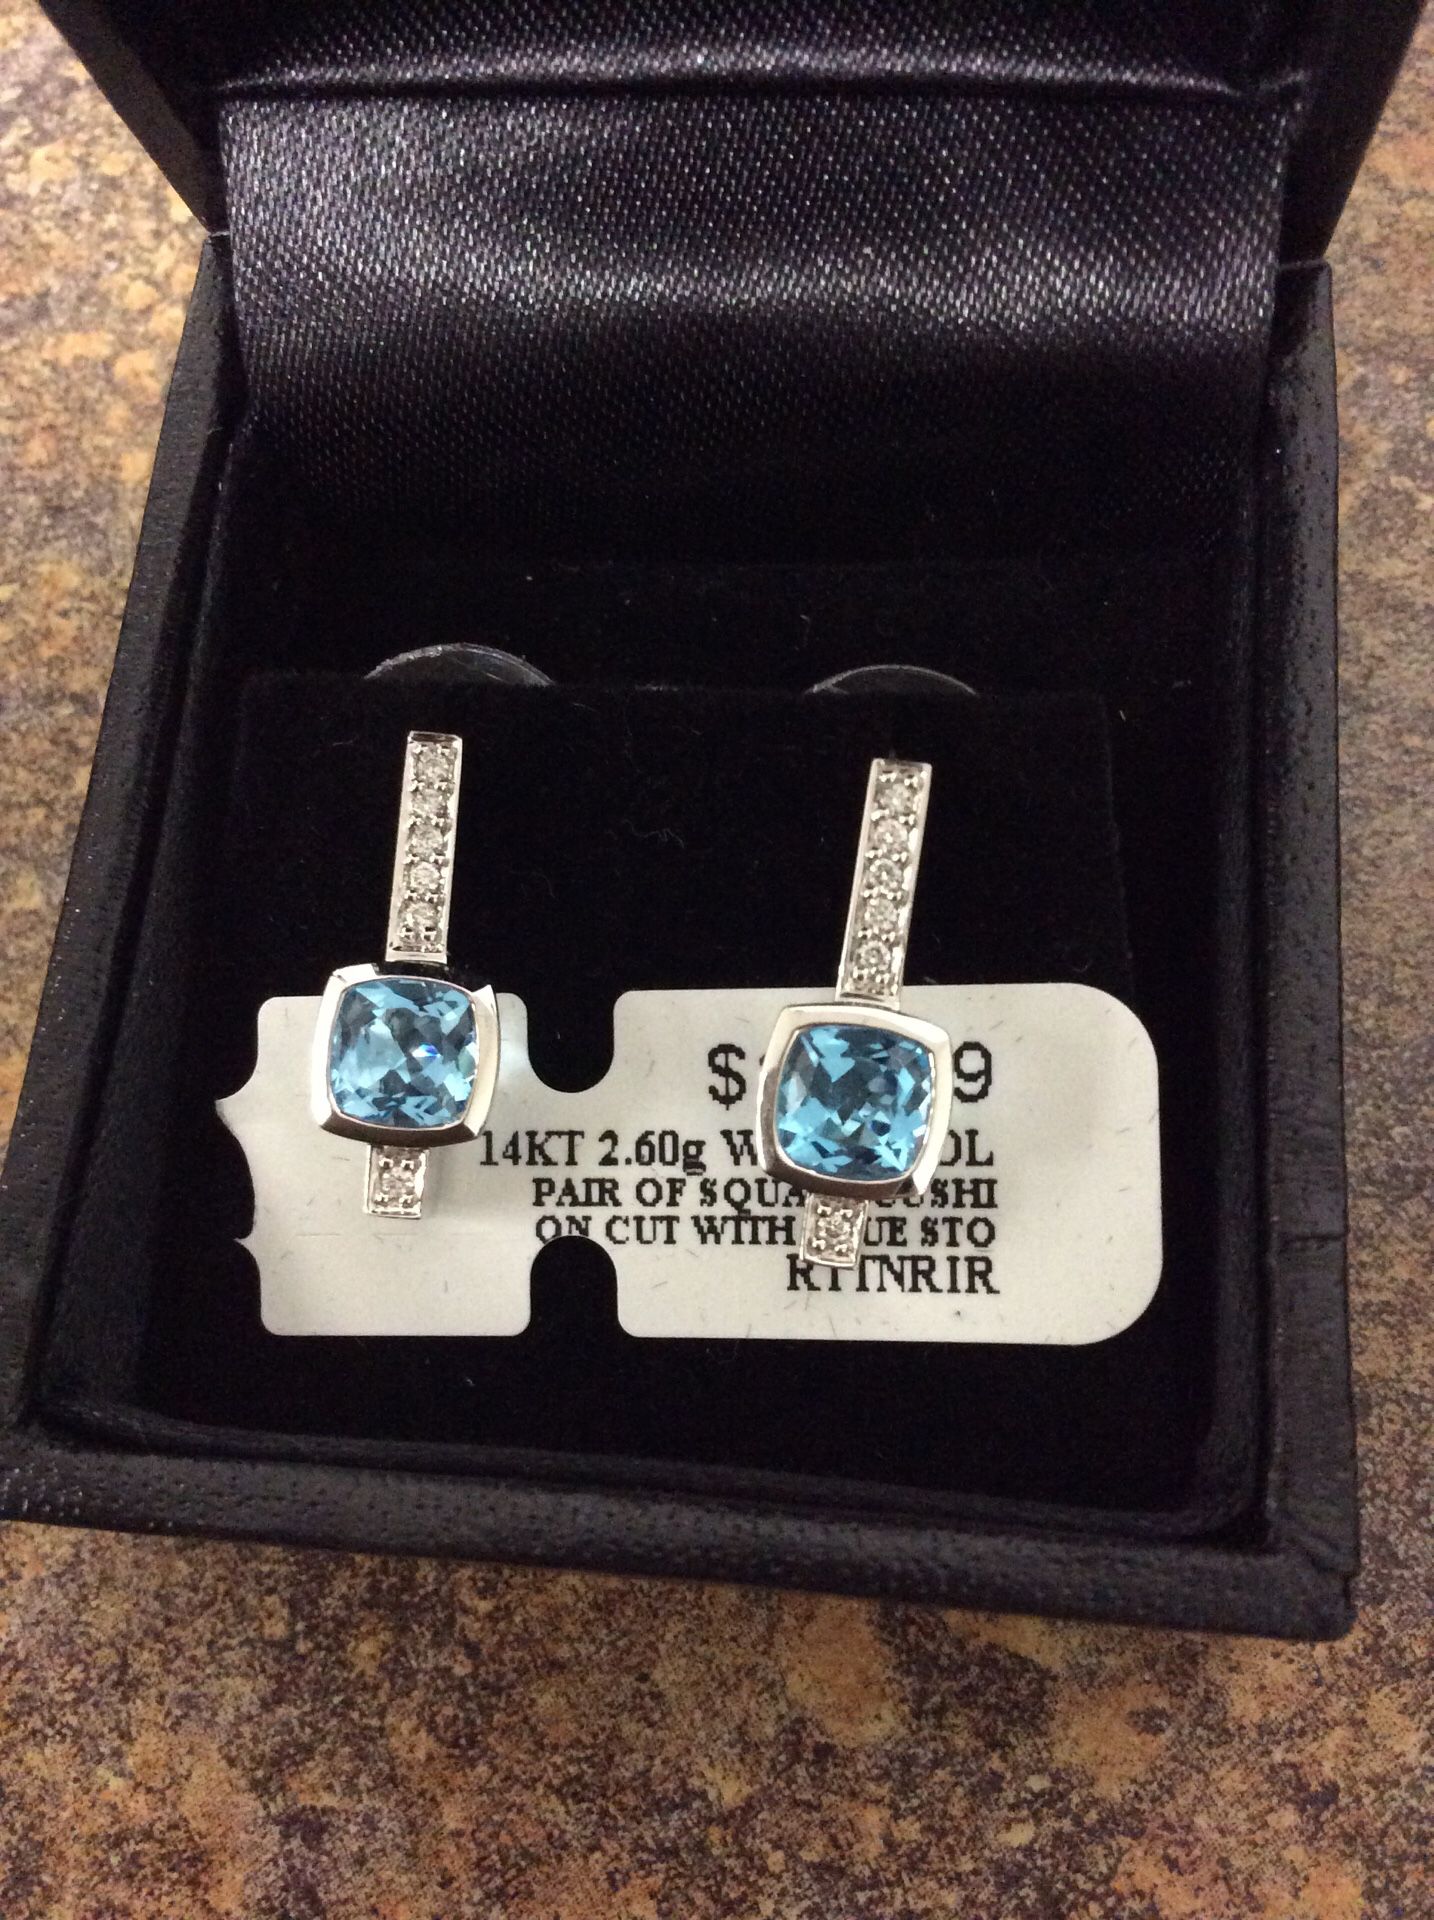 14 kt 2.60 g white gold pair of square cushion cut earrings blue stones inventory code 9291507747